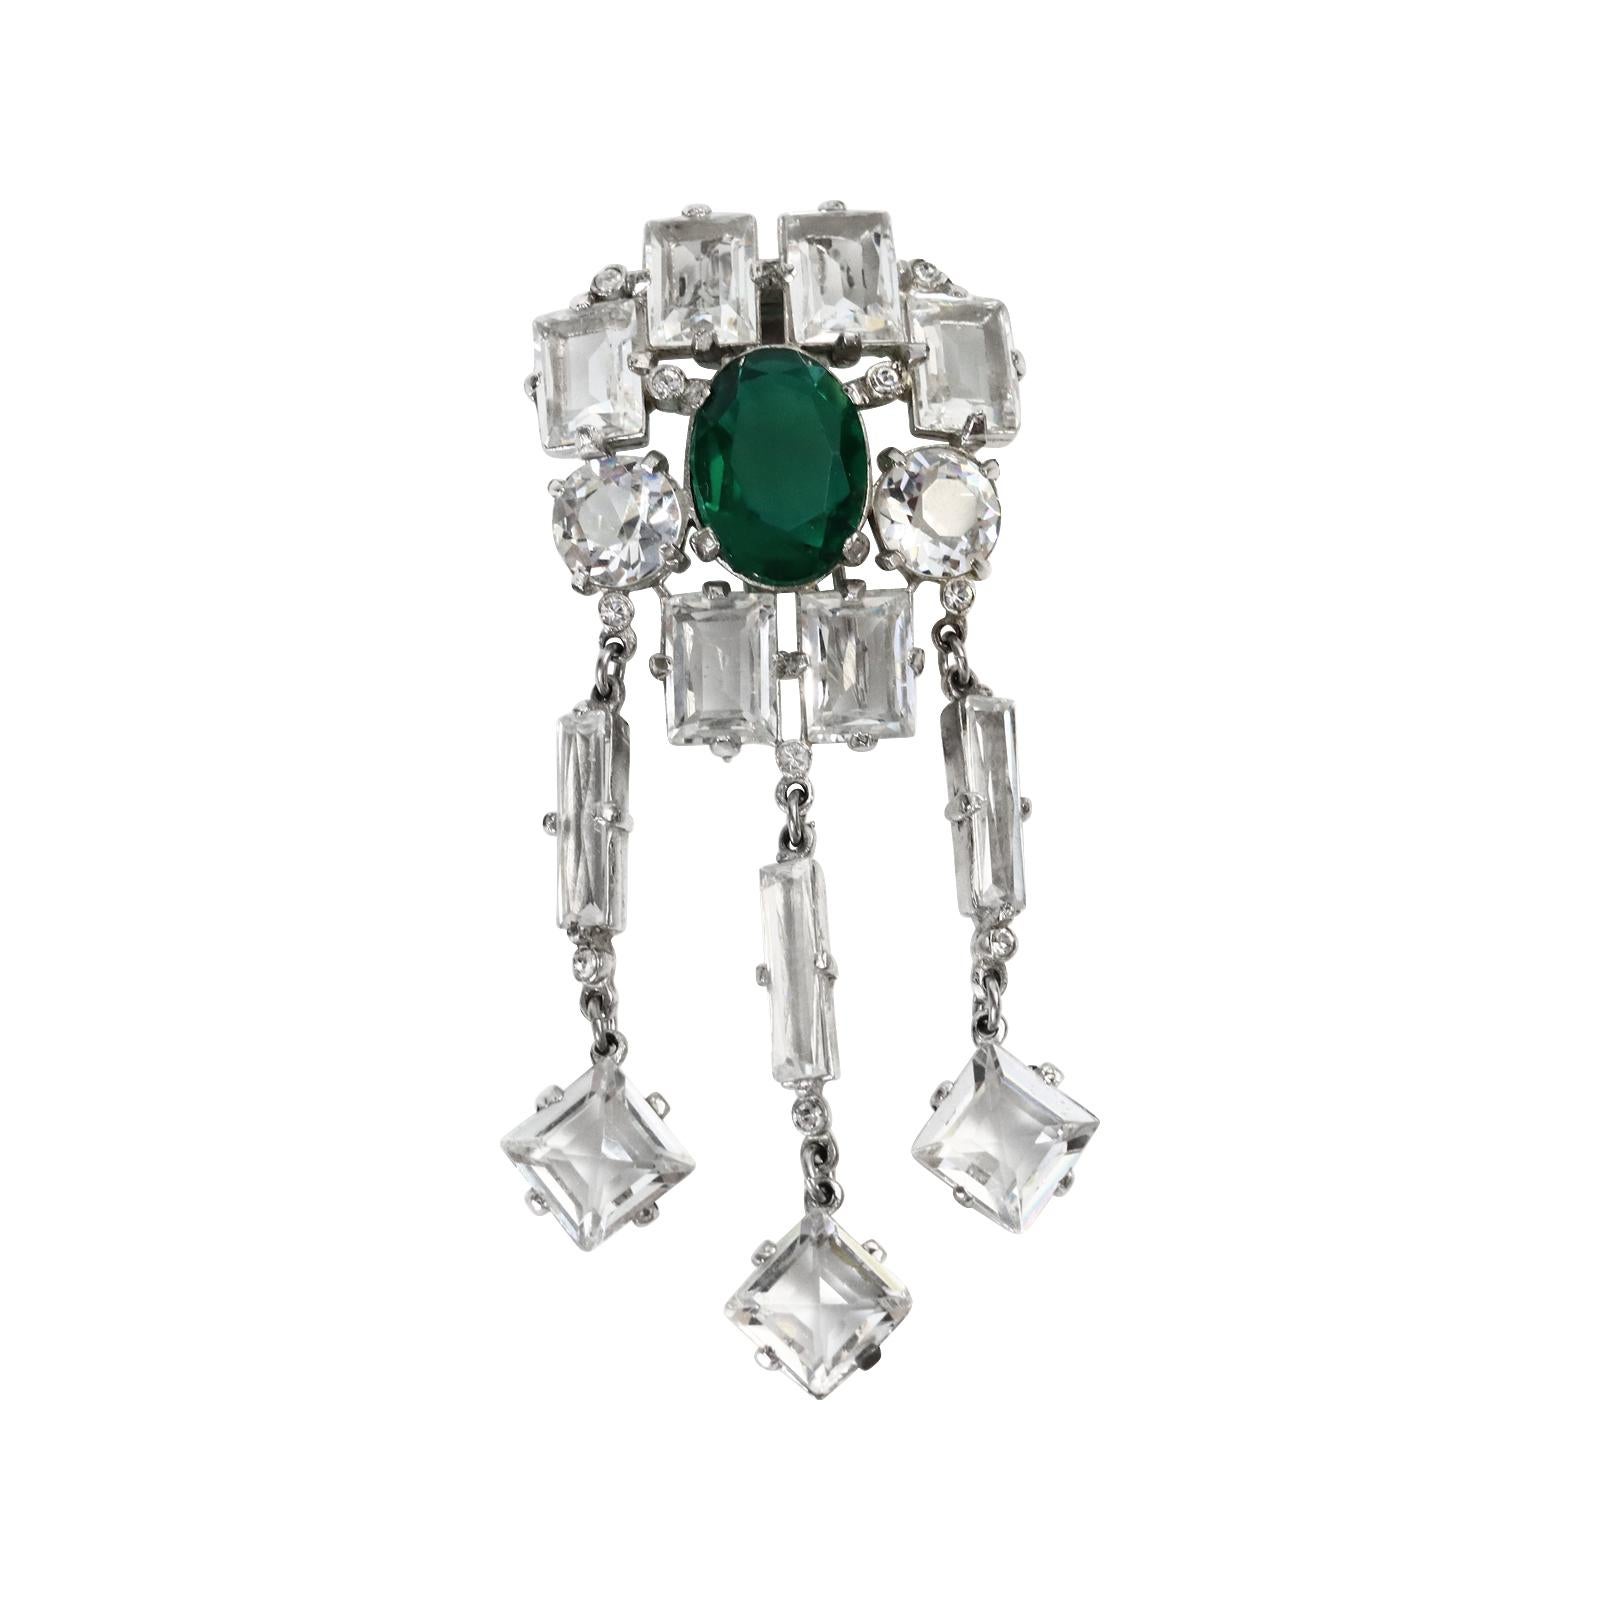 Vintage Open Back Dangling Crystal Clip Circa 1940s. This gorgeous piece has clear open back crystals that surround a large oval Emerald Crystal in the middle. There are various size and cuts in the brooch which add such depth to this piece. Looks